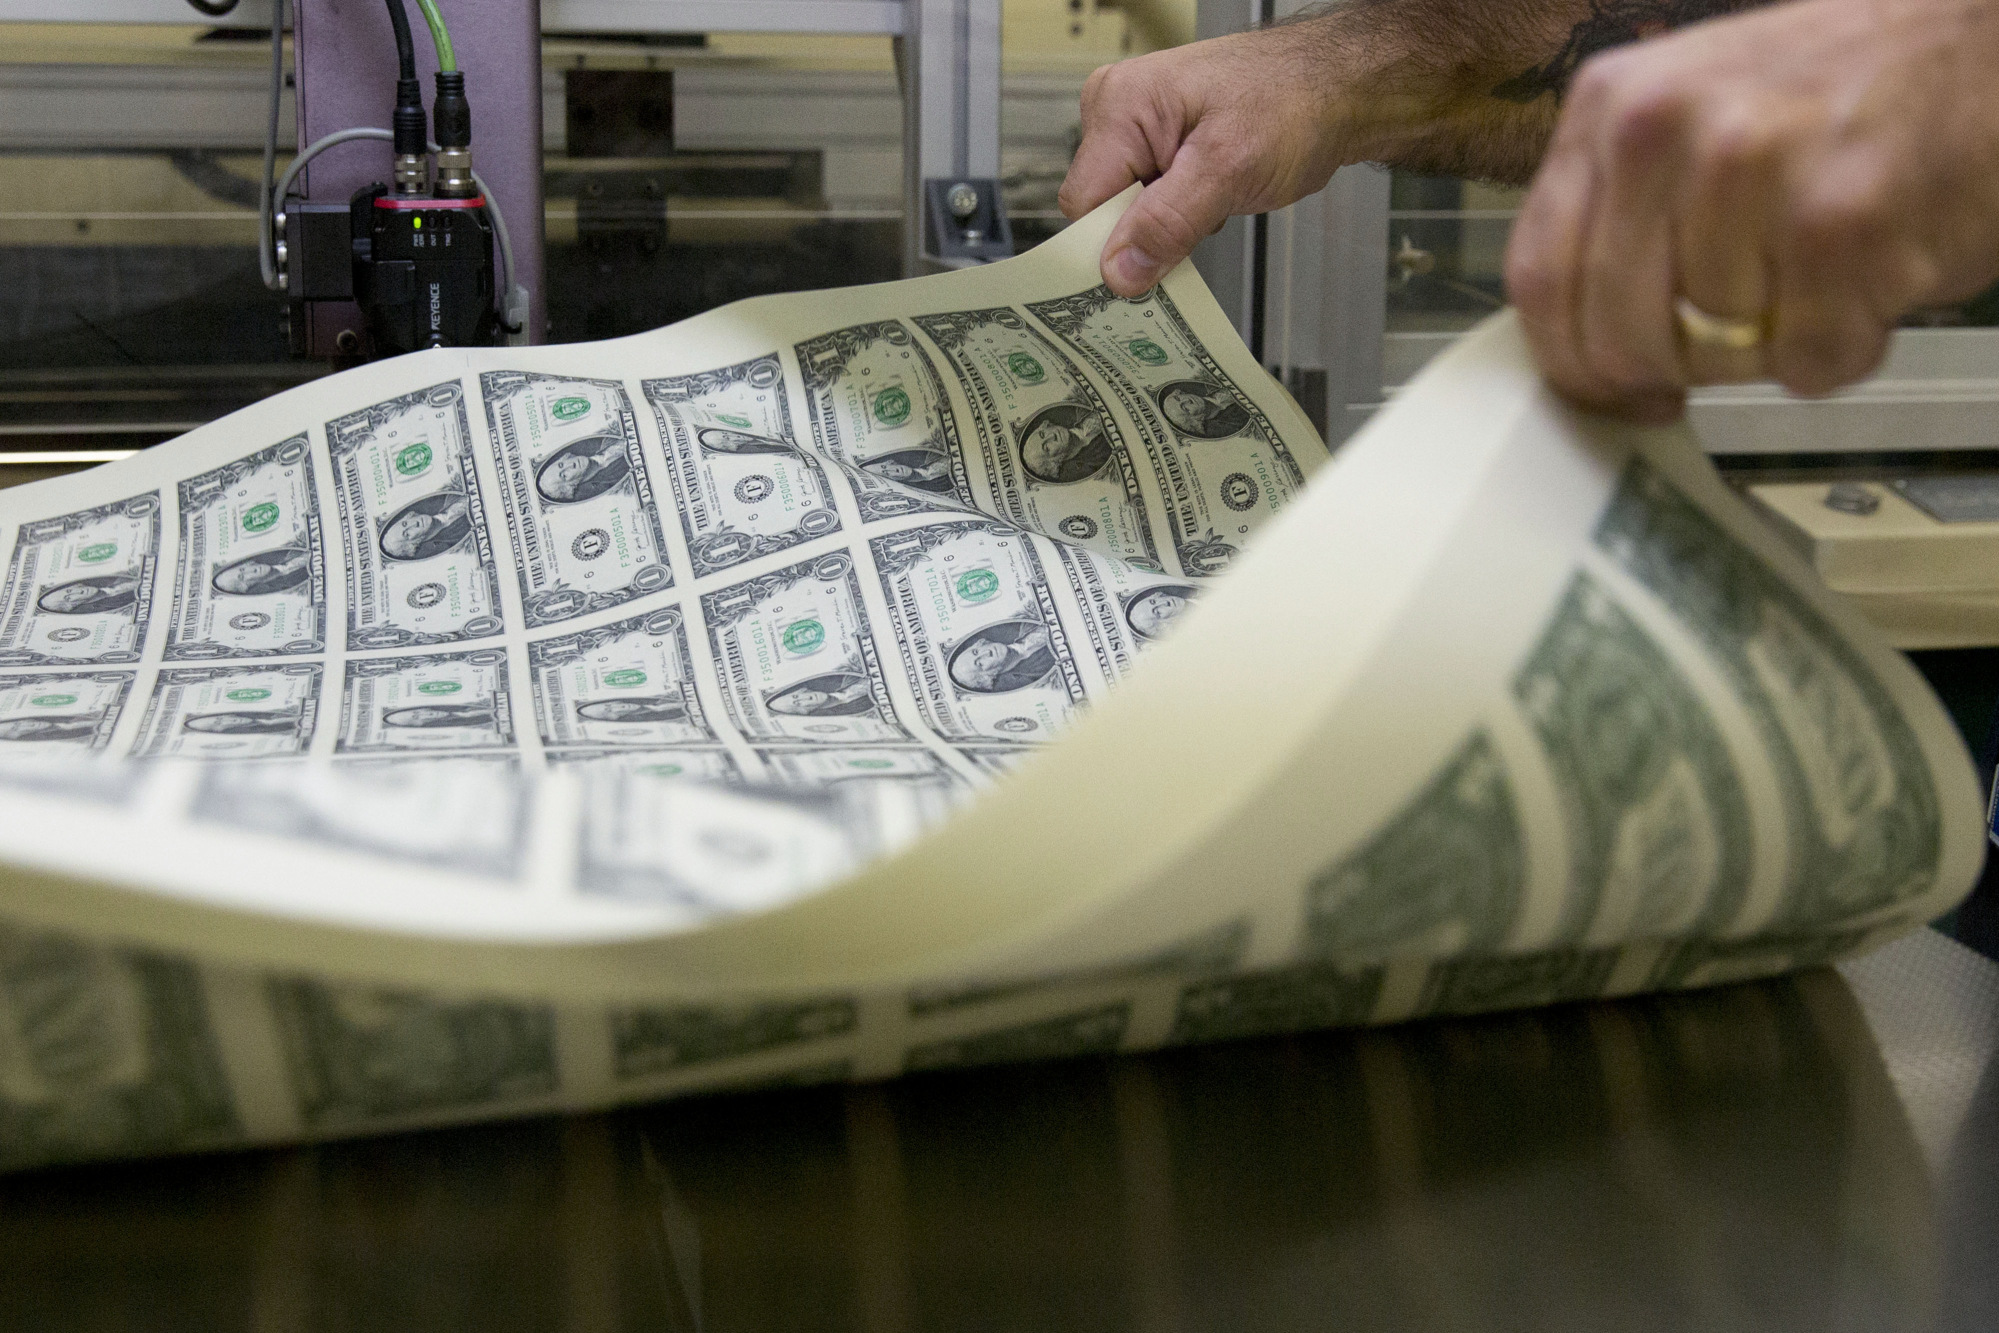 A pressman aerates a stack of&nbsp;uncut sheets of $1 dollar notes at the U.S. Bureau of Engraving and Printing in Washington, D.C.